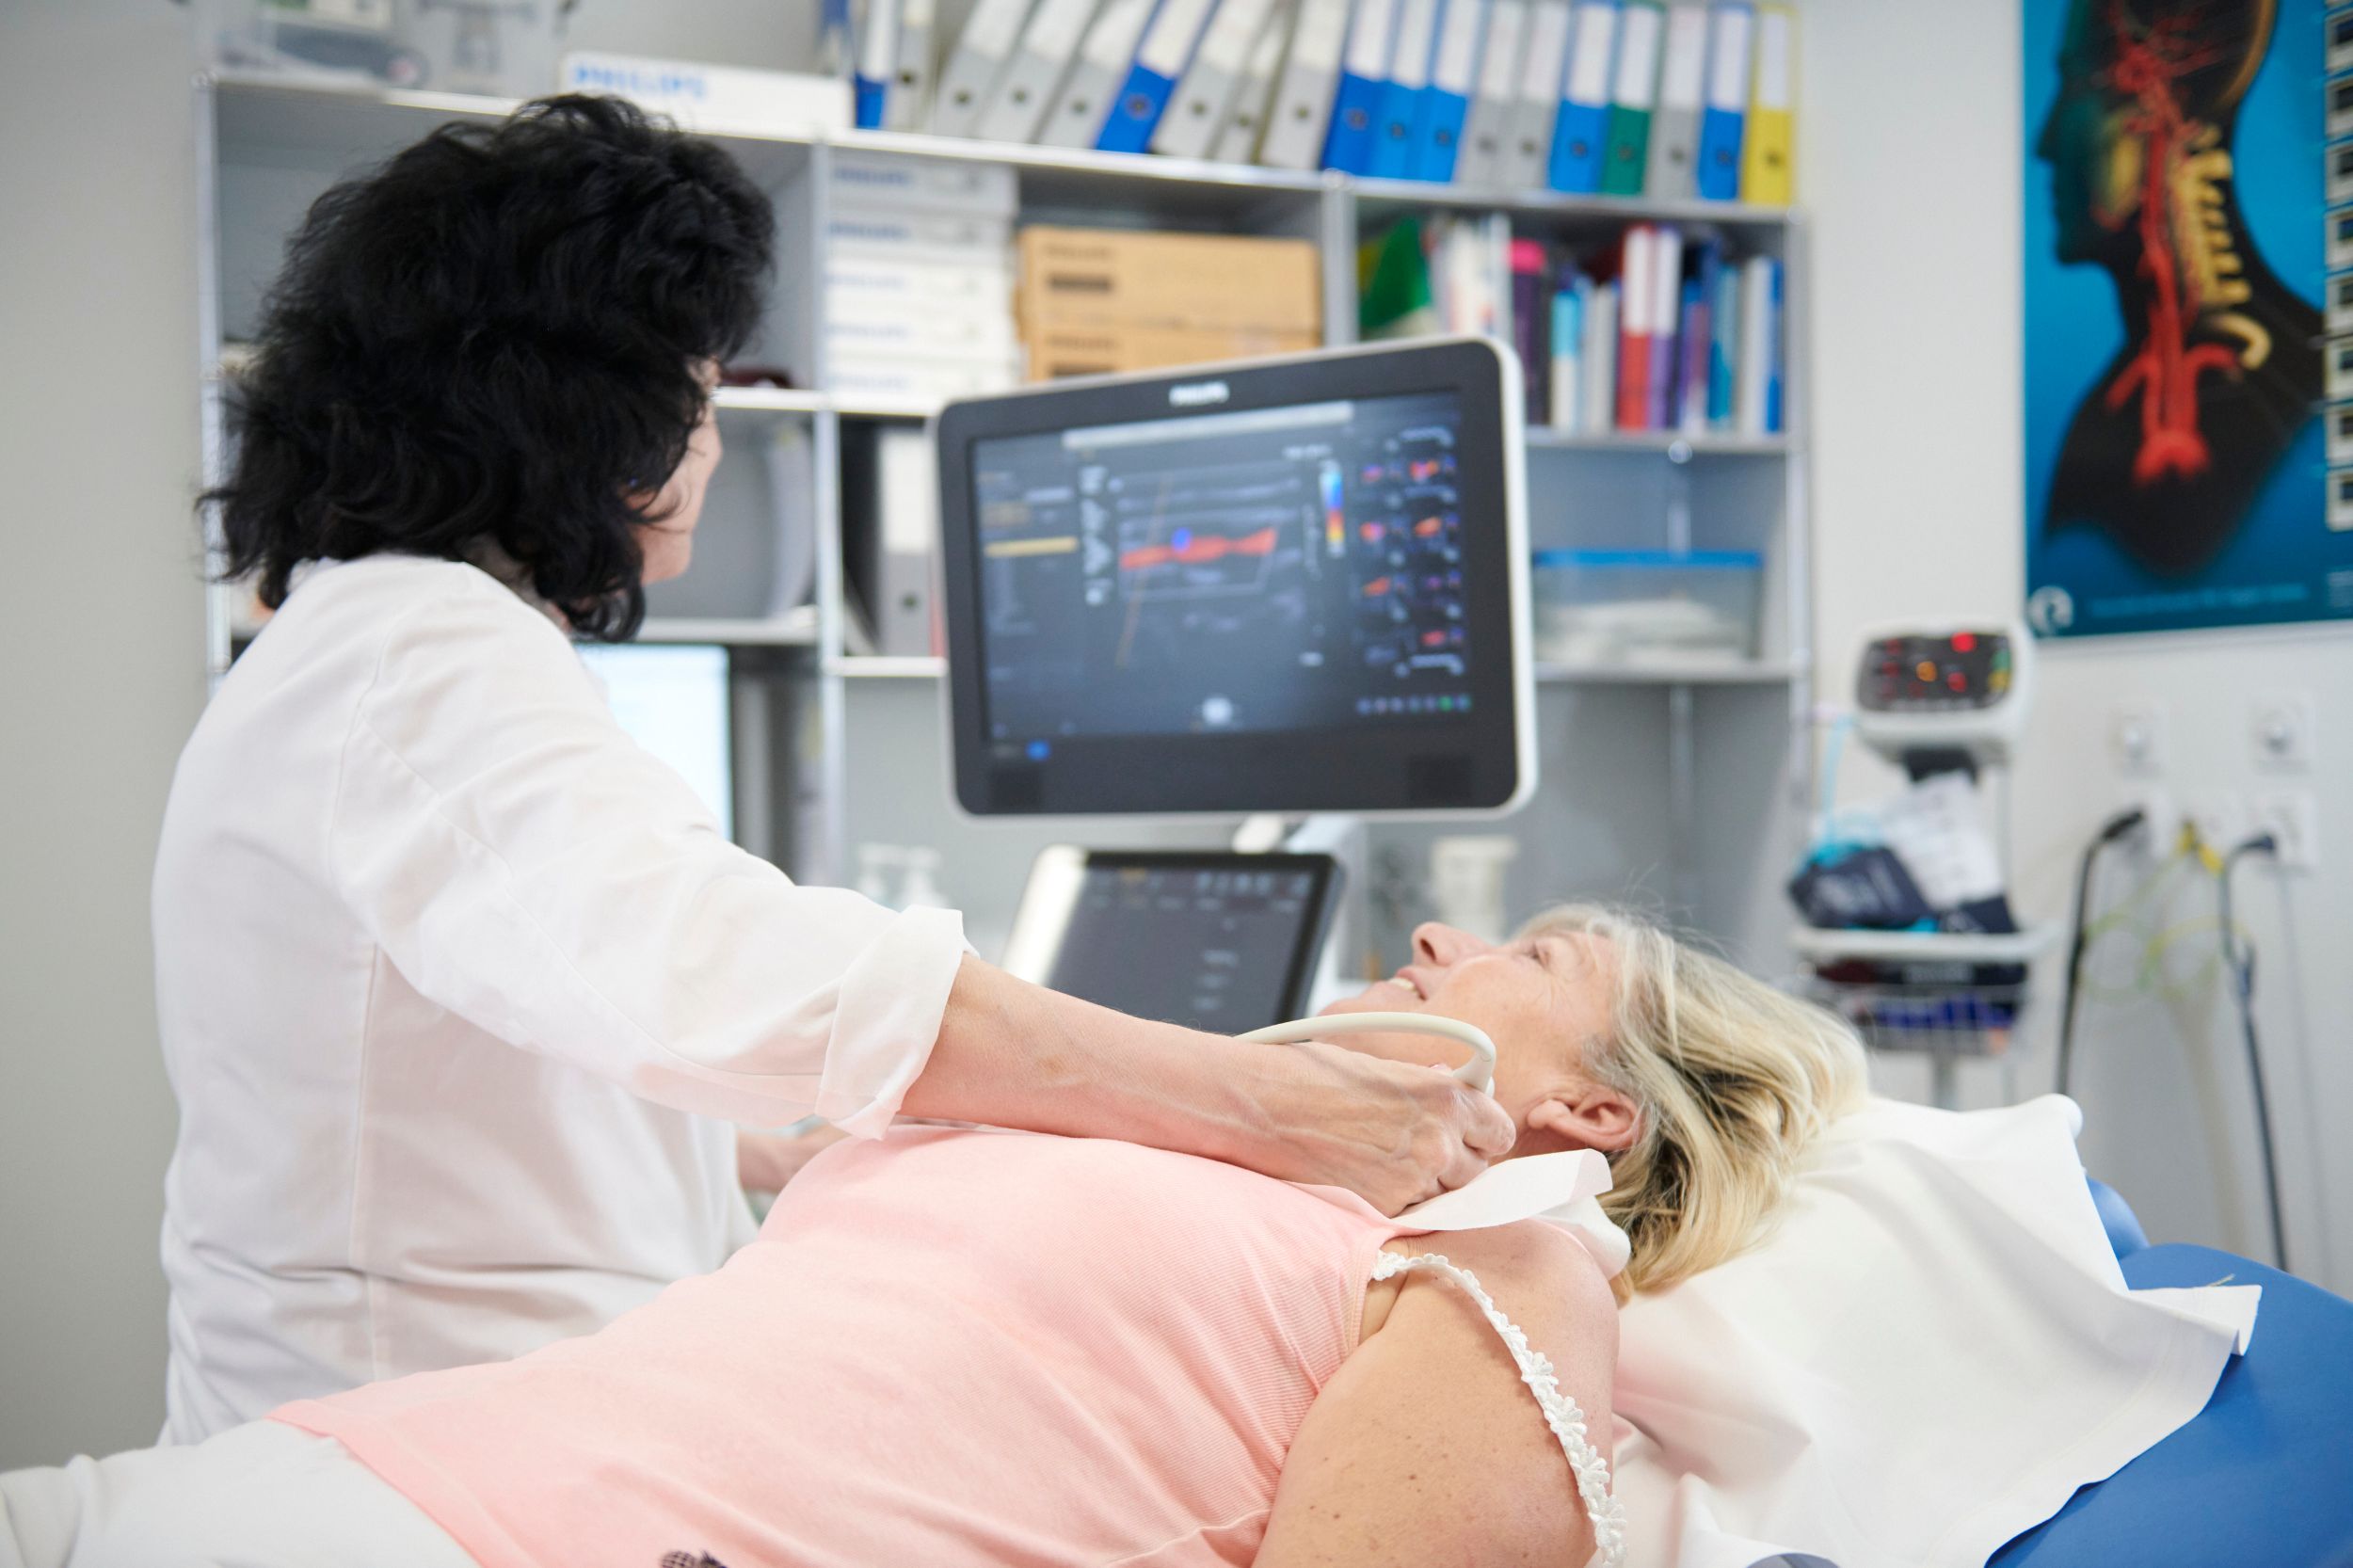 Doctor performs neurovascular ultrasound on patient